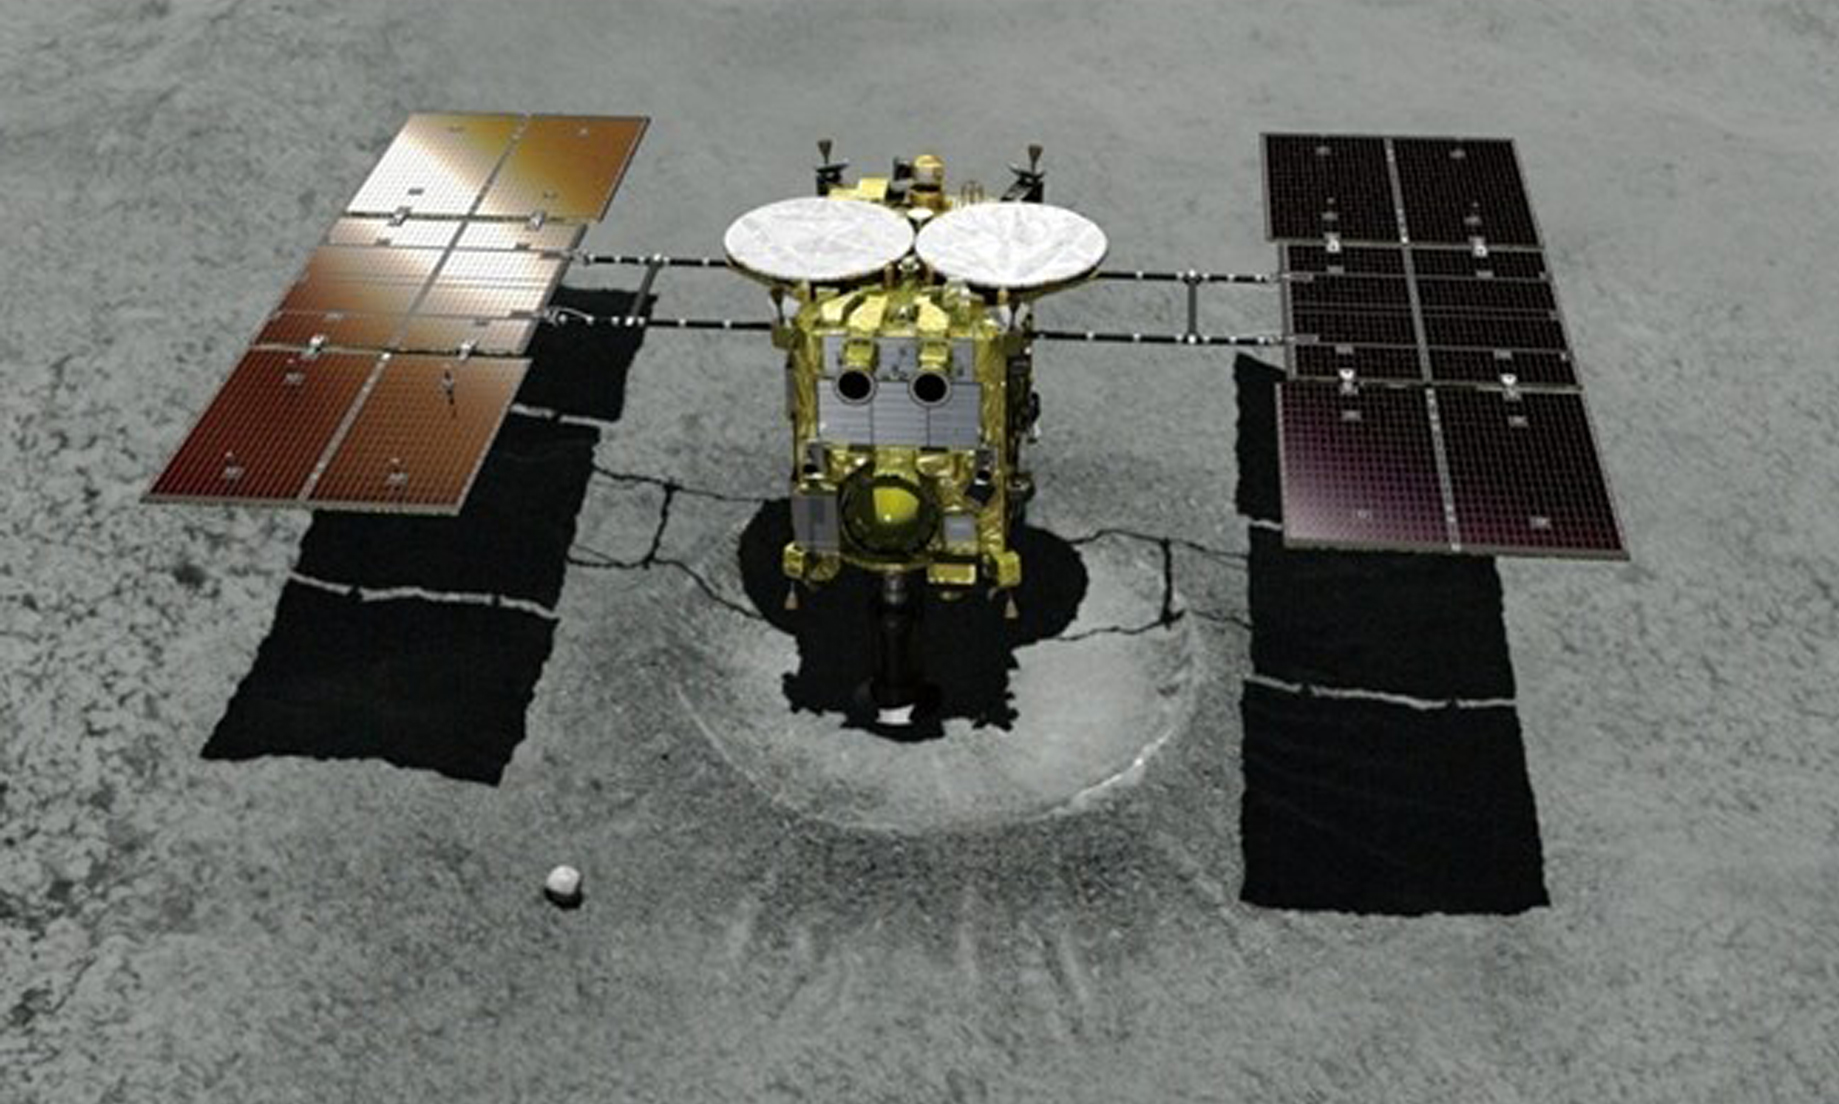 Japanese spacecraft to attempt landing on distant asteroid